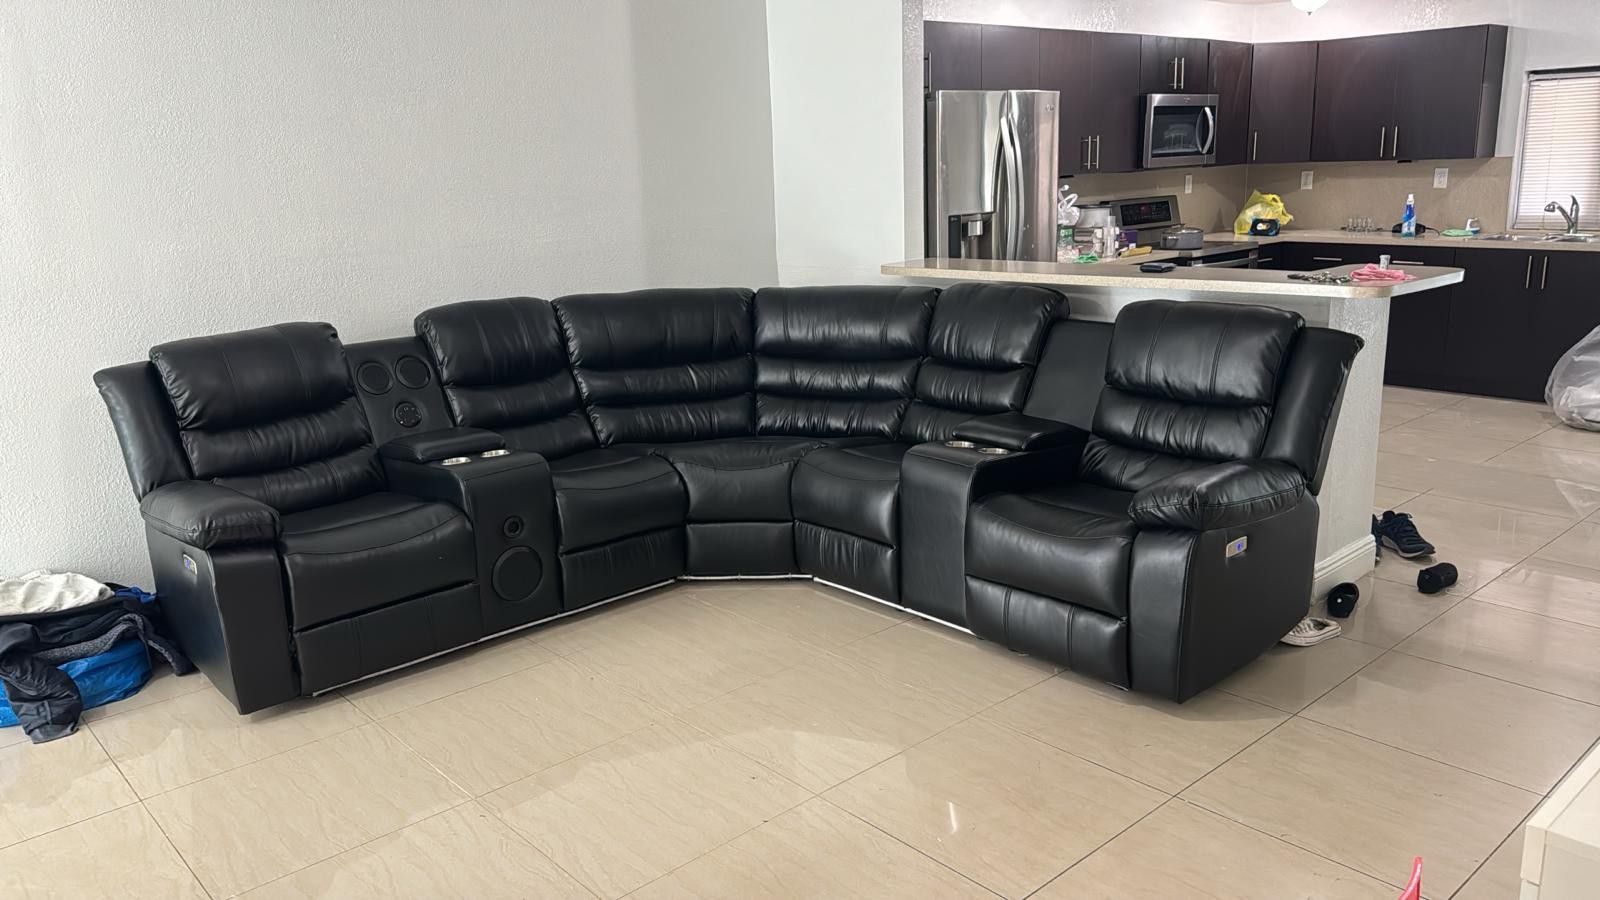 Brand New Recliner Sectional Couch/ Sofá Seccional Reclinable Nuevo A Estrenar ...Delivery Available 